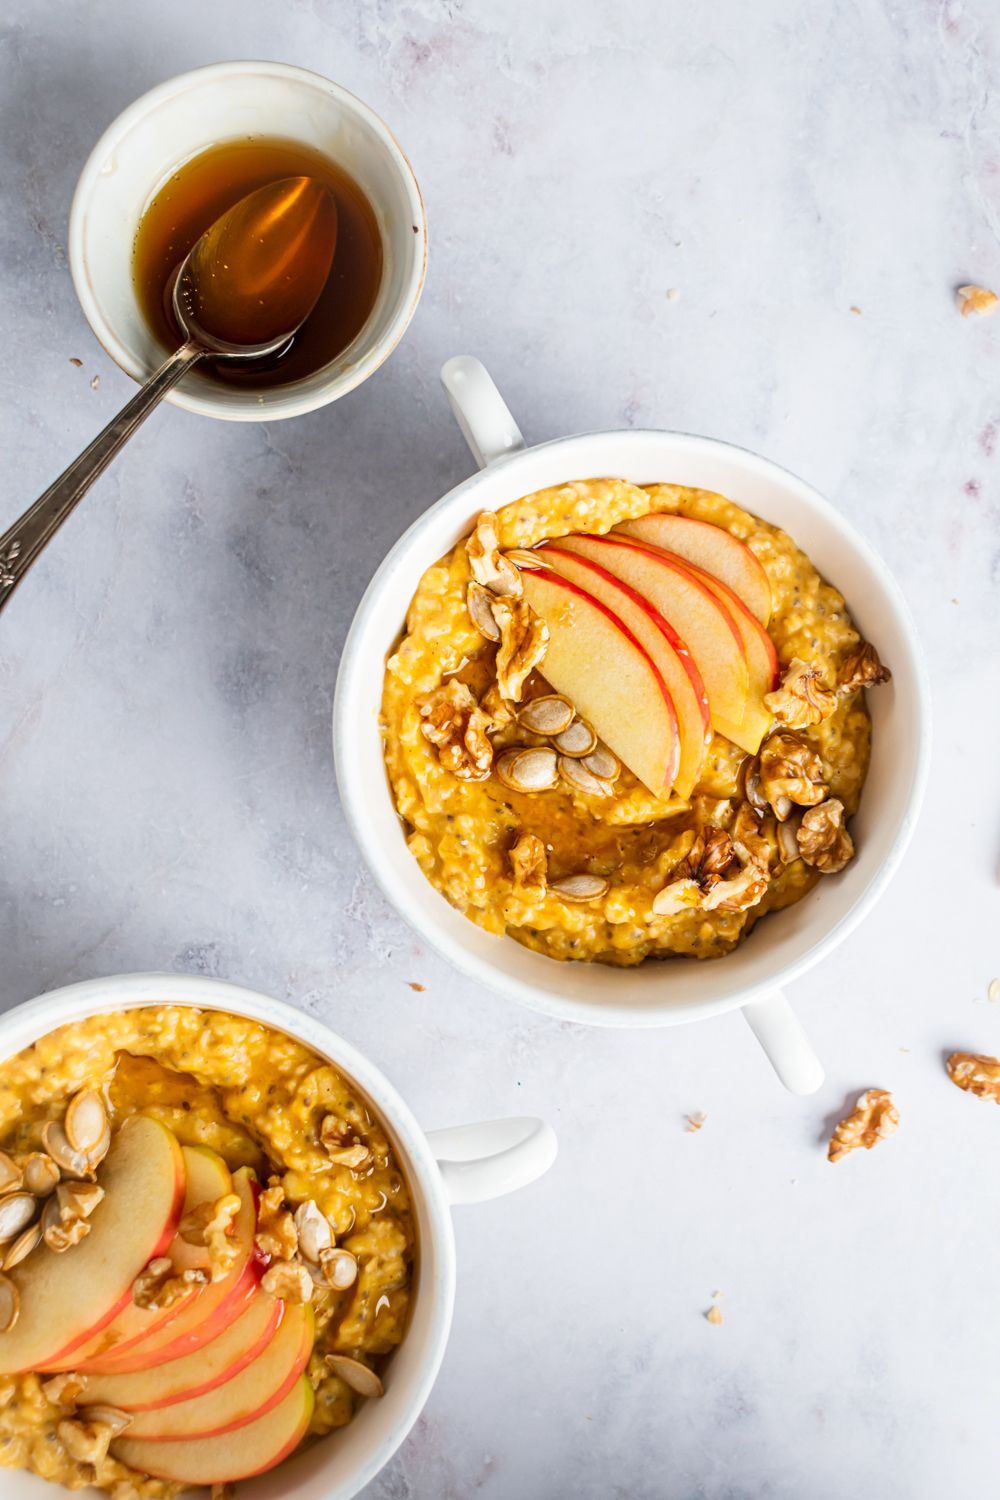 Pumpkin steel cut oatmeal with walnuts, pumpkin seeds, maple syrup, and slices apples.